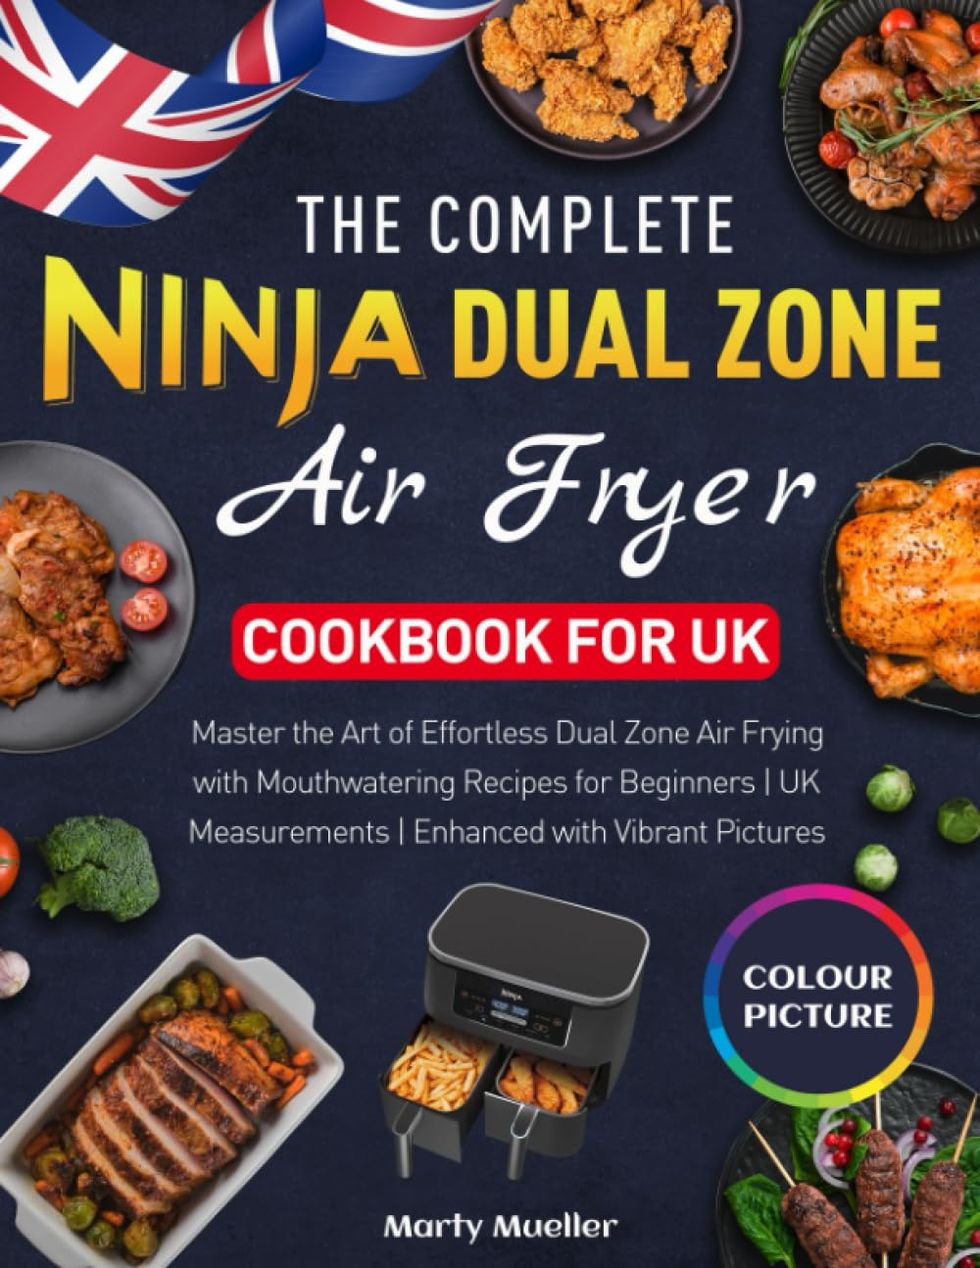 The Complete Ninja Dual Zone Air Fryer Cookbook by Marty Mueller